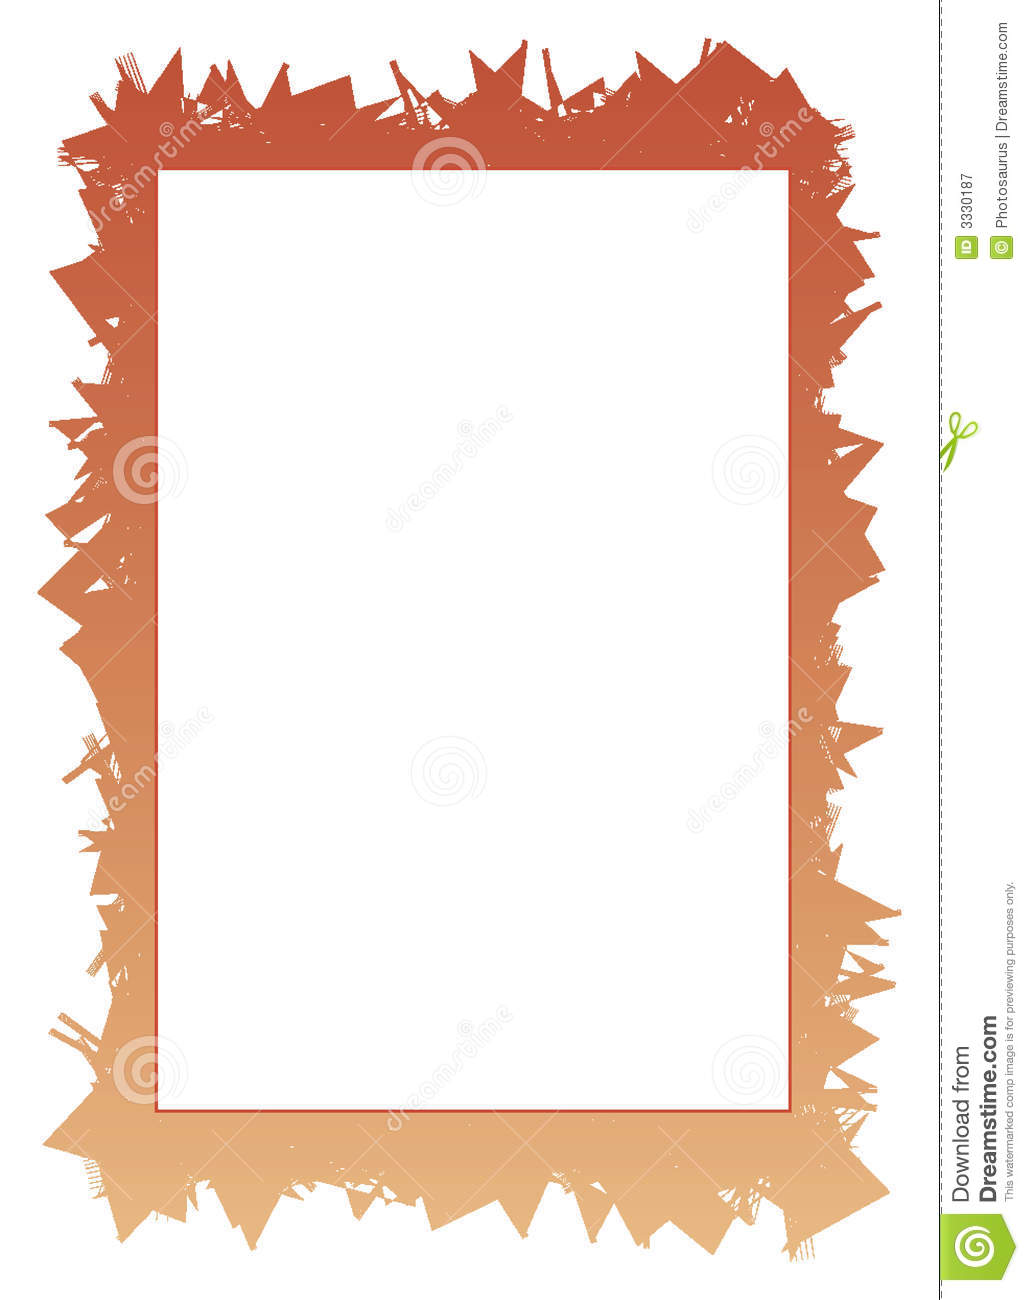 Jagged Border With White Frame Royalty Free Stock Photography   Image    